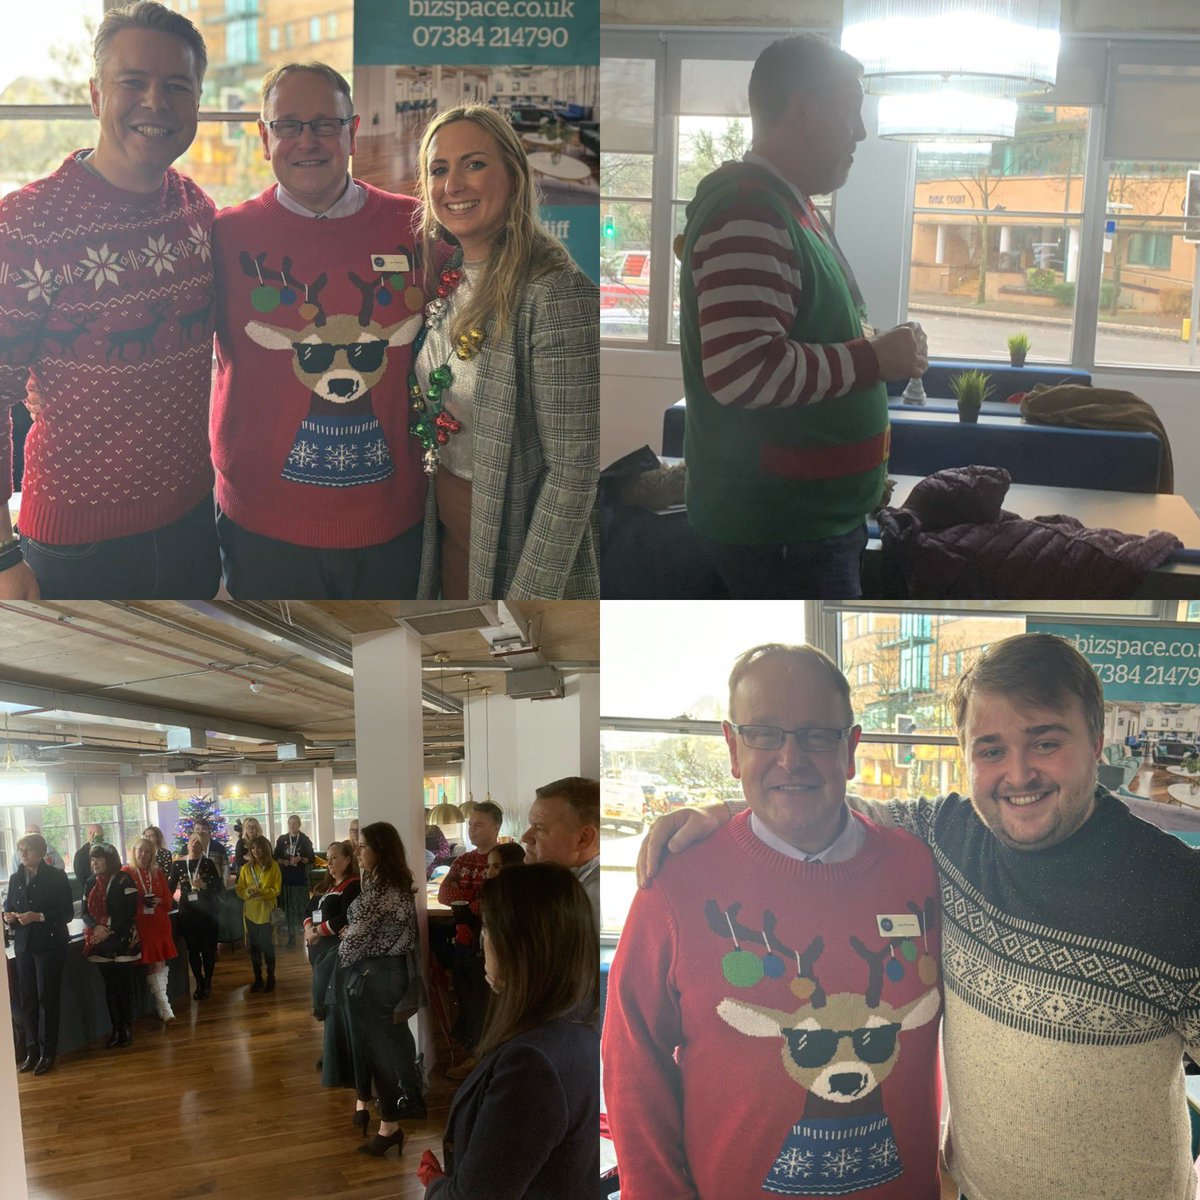 It was the @ZokitBiz Christmas Mixer today at @BizSpaceUK in Cardiff, hosted by Mr Christmas himself Neil Lloyd. 

It was great to see so many there including the fabulous Ceri Evans & Sarah Evans from @RemooMortgages and Matthew Thomas from @THS_ltd 
#businessnetworkimg